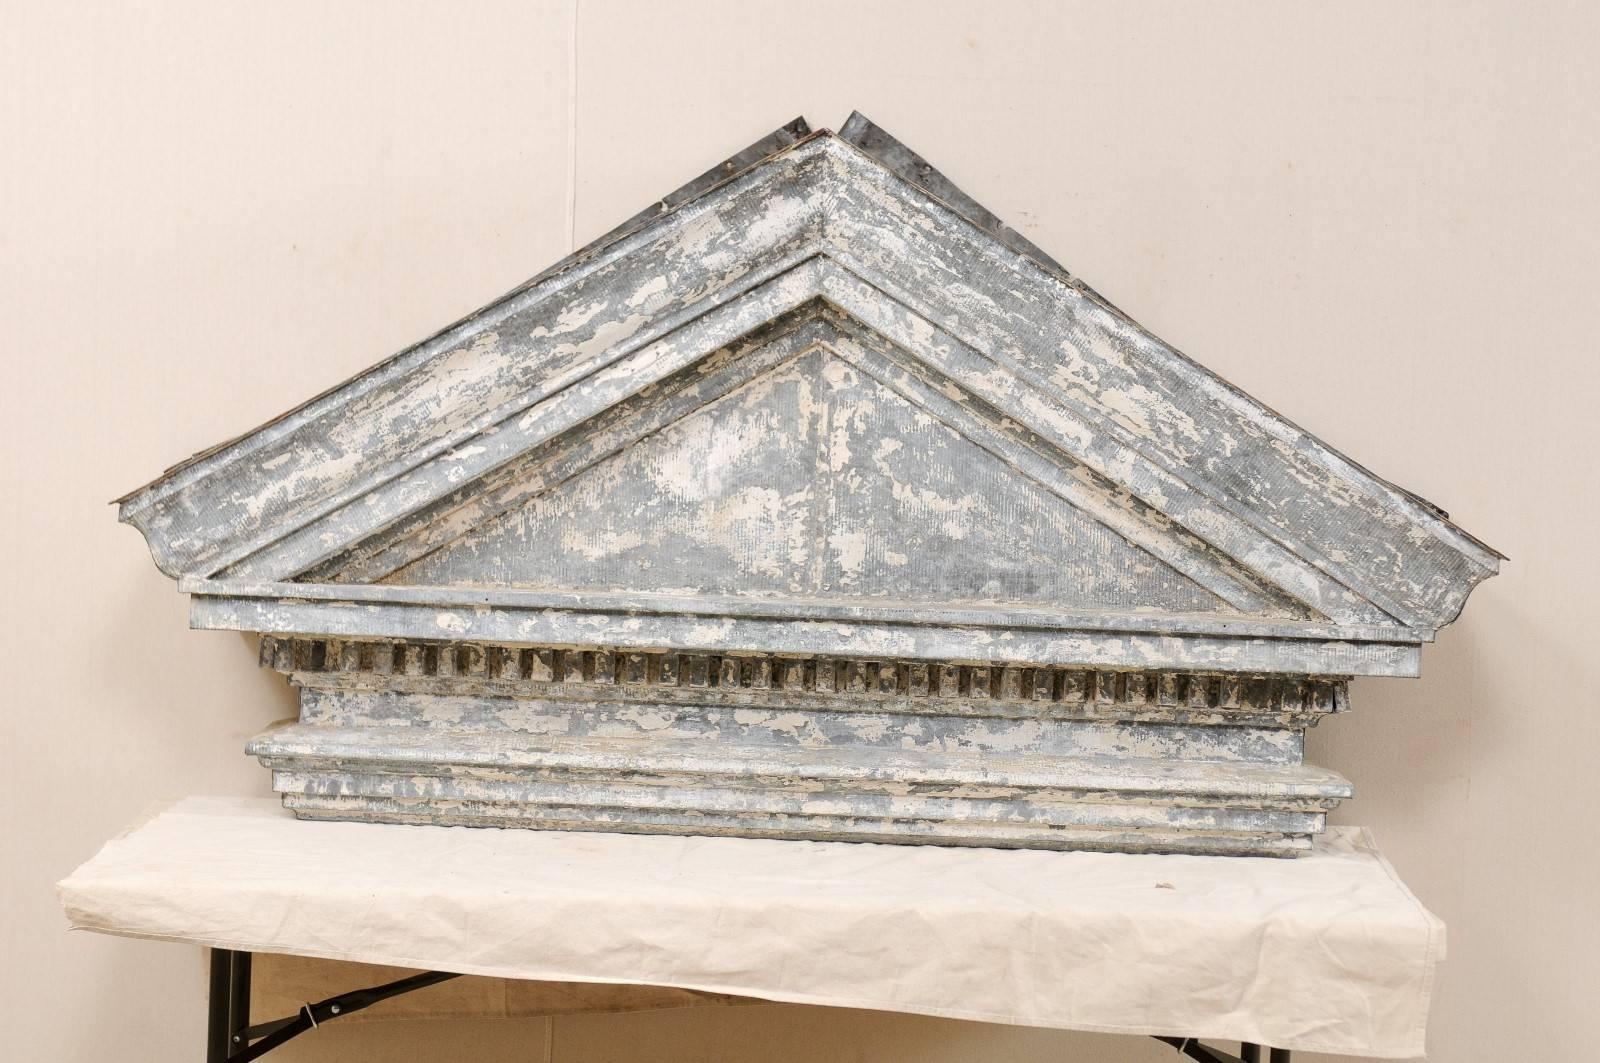 An American zinc pediment from the 19th century. This antique zinc pediment, with it's overall triangular-shape, once adorn the entry exterior of an old building. This piece is nicely aged, with beautiful patina throughout. This pediment features